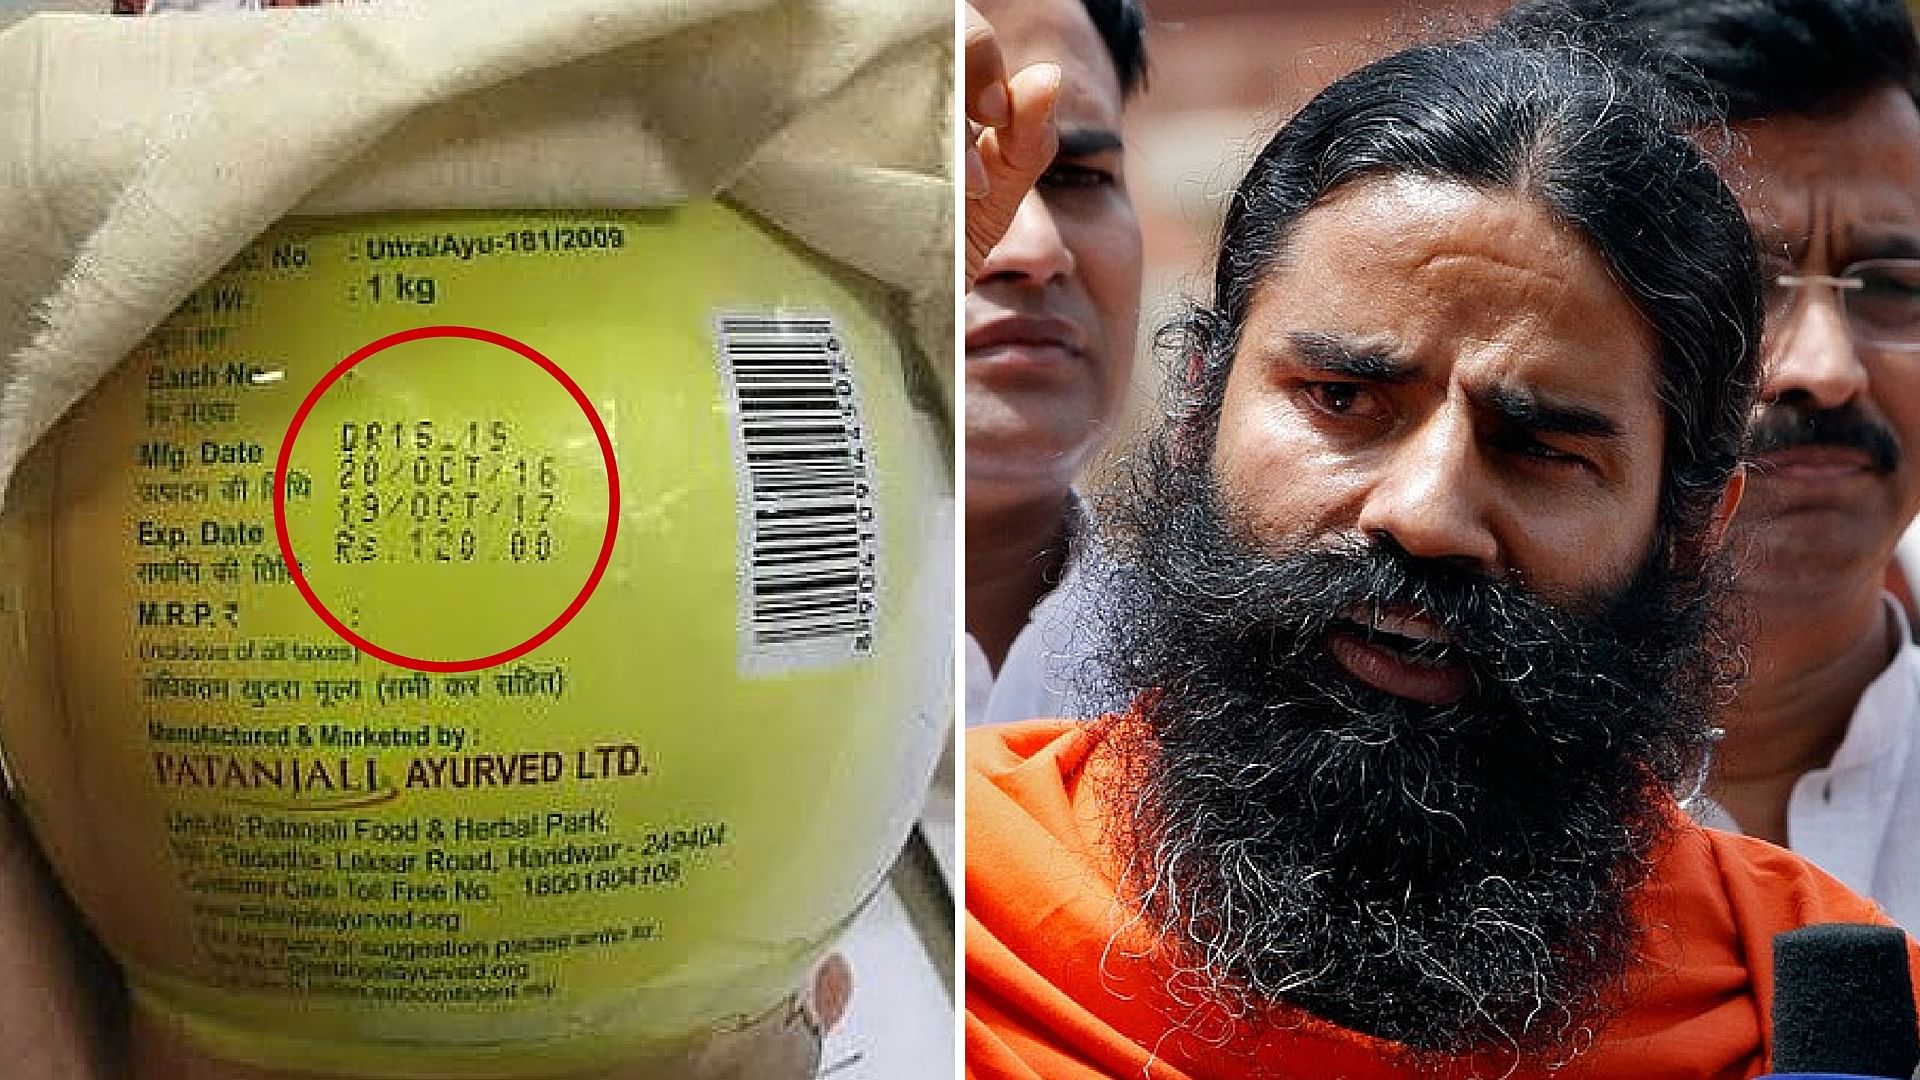 Baba Ramdev’s Patanjali Ayurved under the scanner. (Photo: <i><a href="http://timesofindia.indiatimes.com/city/lucknow/Not-yet-made-murabba-finds-way-to-shop-shelves/articleshow/51279141.cms">The Times of India</a></i>/Reuters)